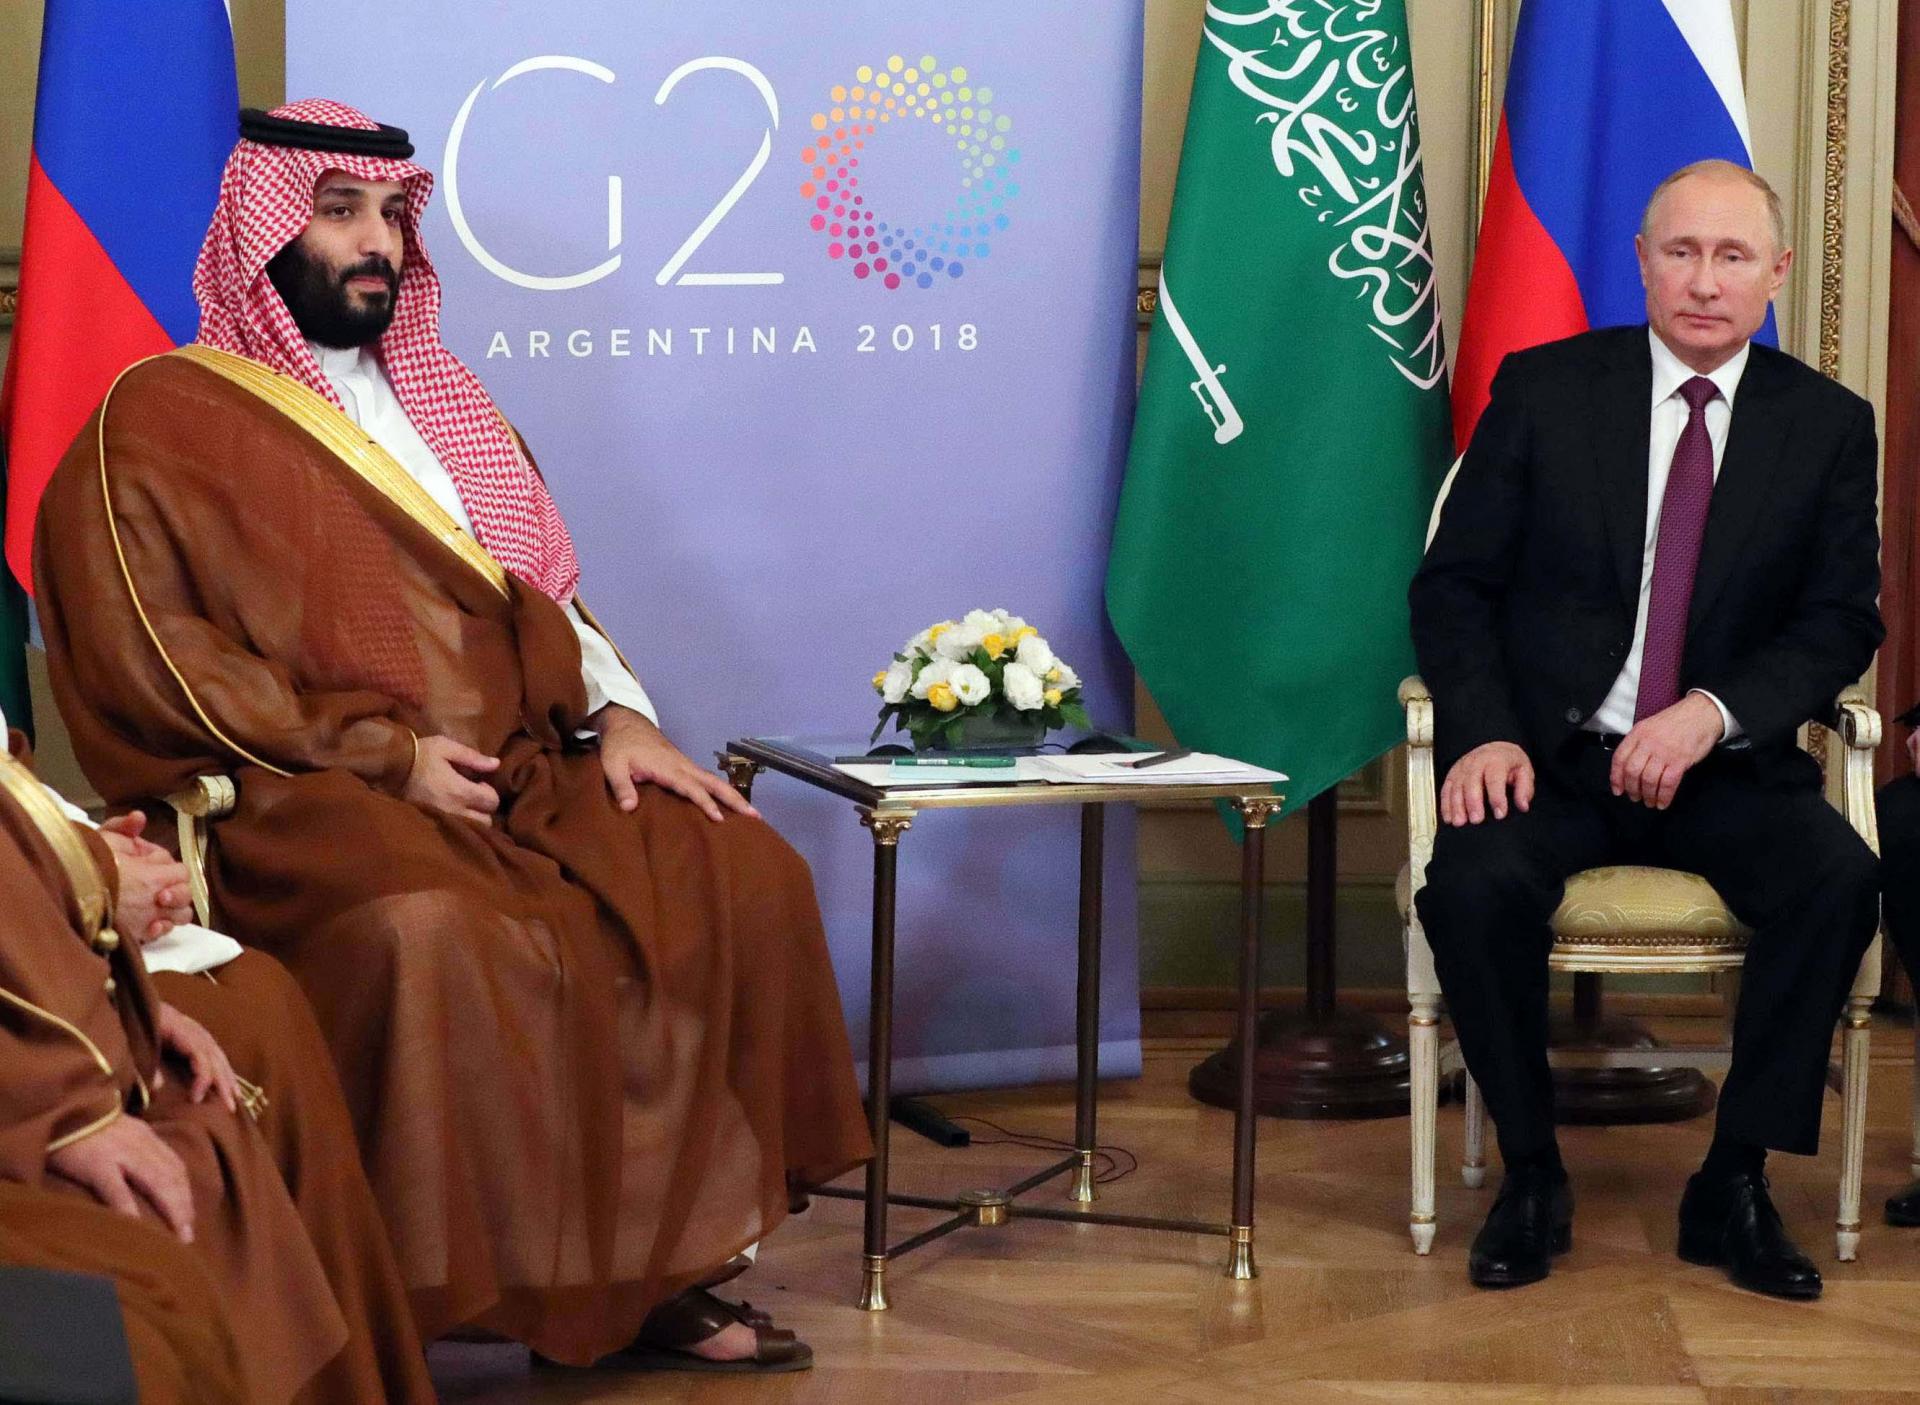 "We are going to survey together the market situation with Saudi Arabia and respond to it operationally," said Putin.